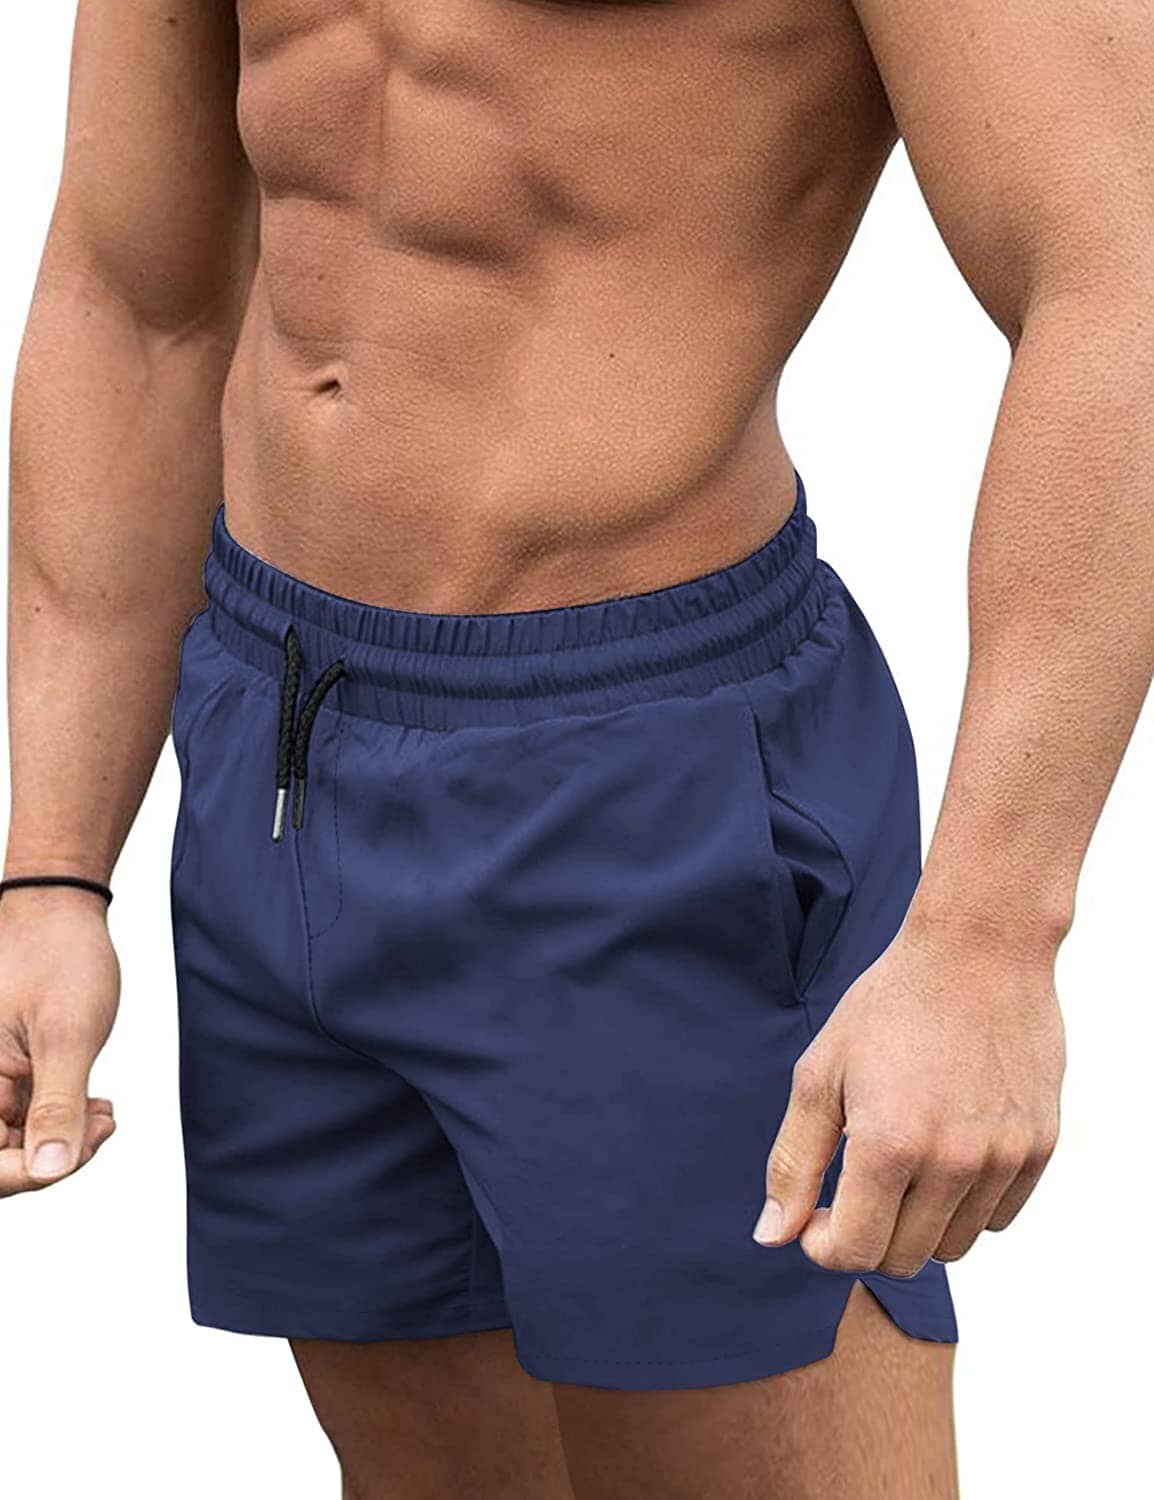 Classic Quick Dry Sport Shorts (US Only) Shorts COOFANDY Store Navy Blue M 